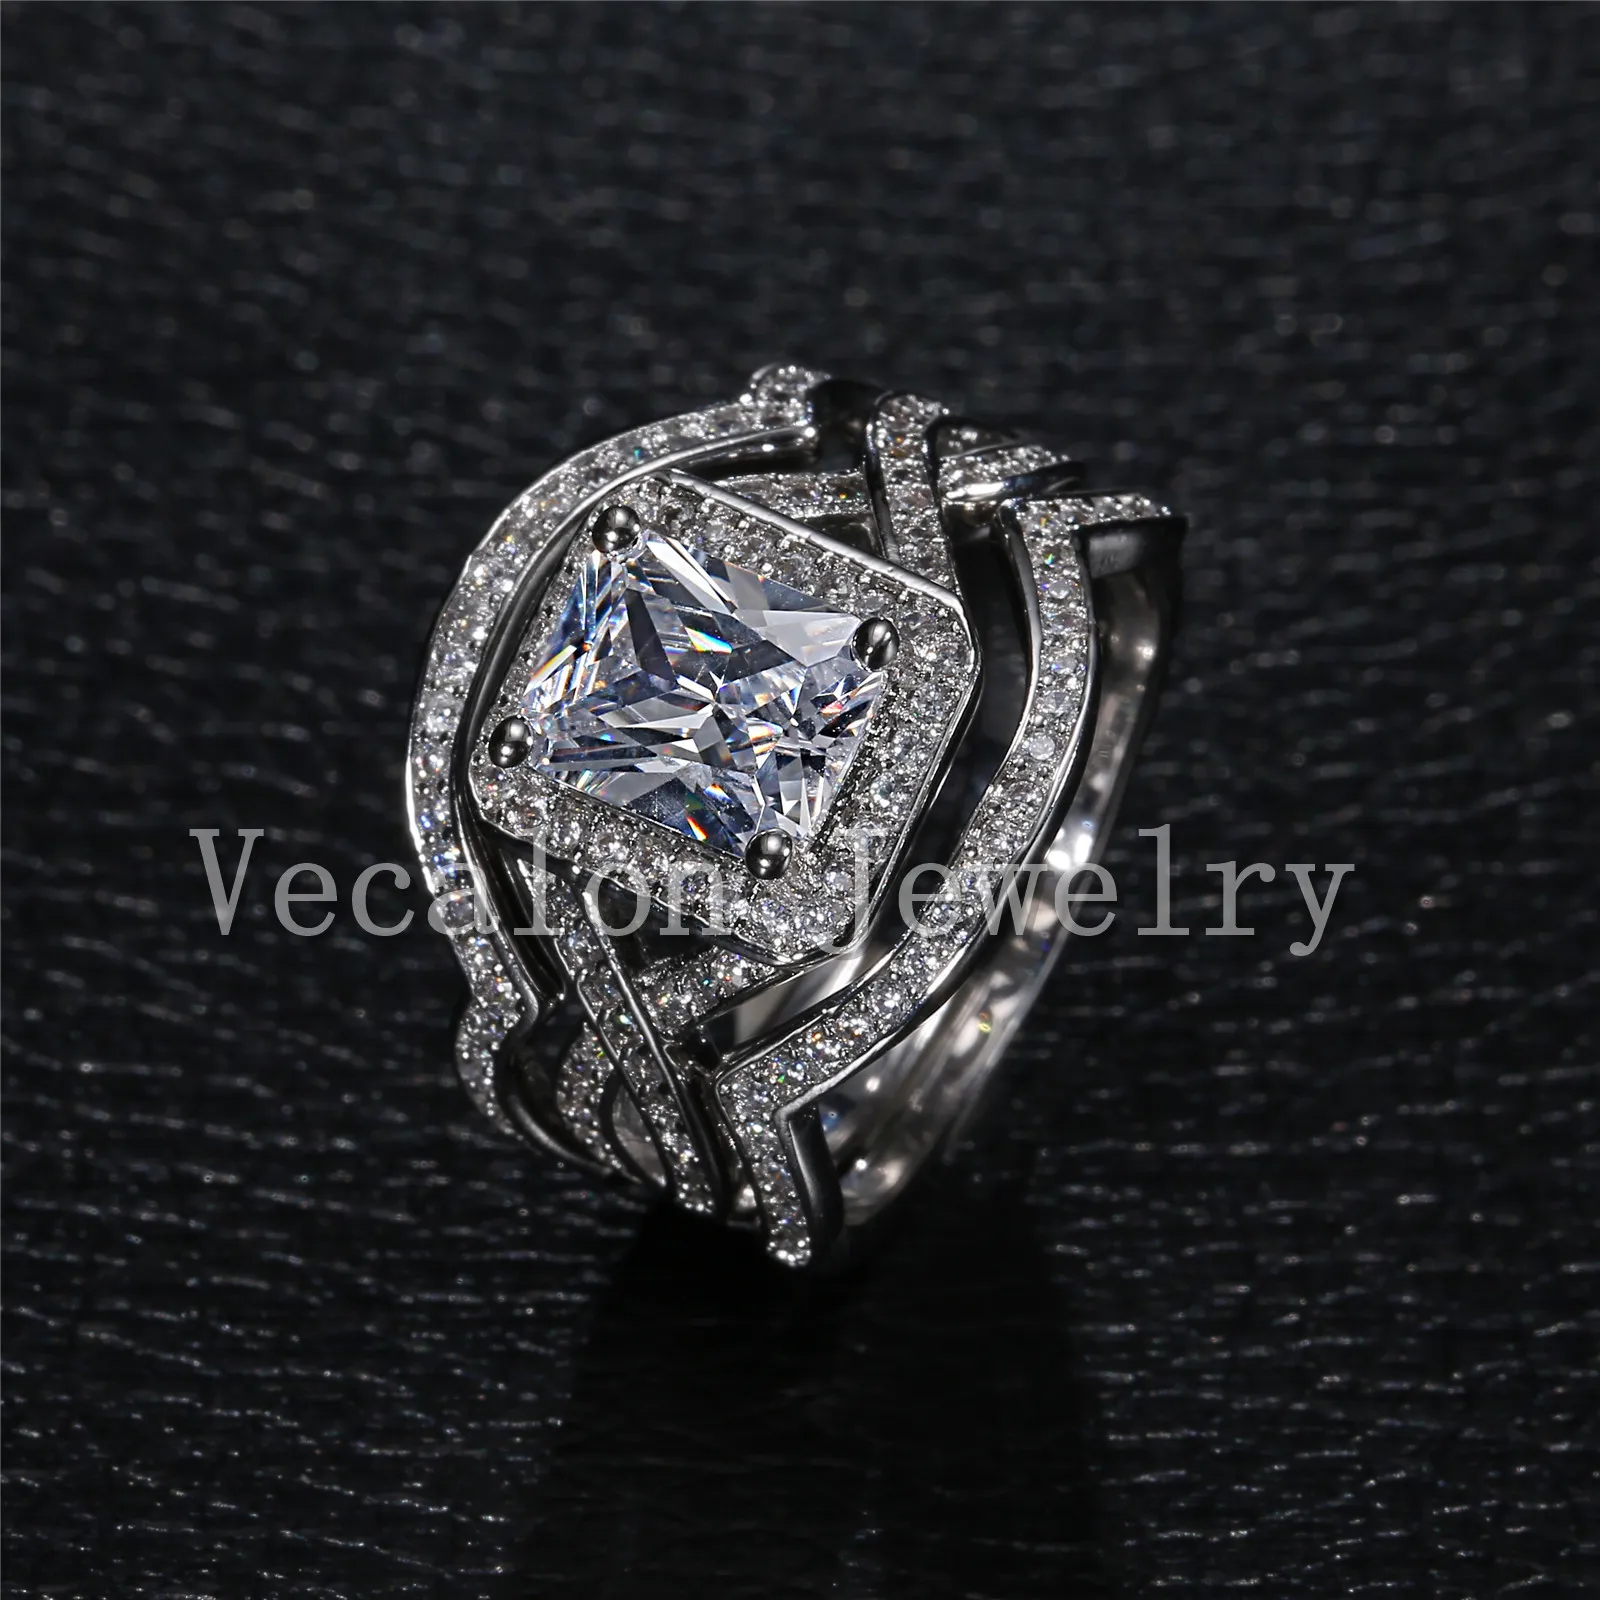 Vecalon Princess Cut 4CT Gesimuleerde Diamond CZ 3-in-1 Engagement Wedding Band Ring Set voor Vrouwen 10KT White Gold Filled Ring